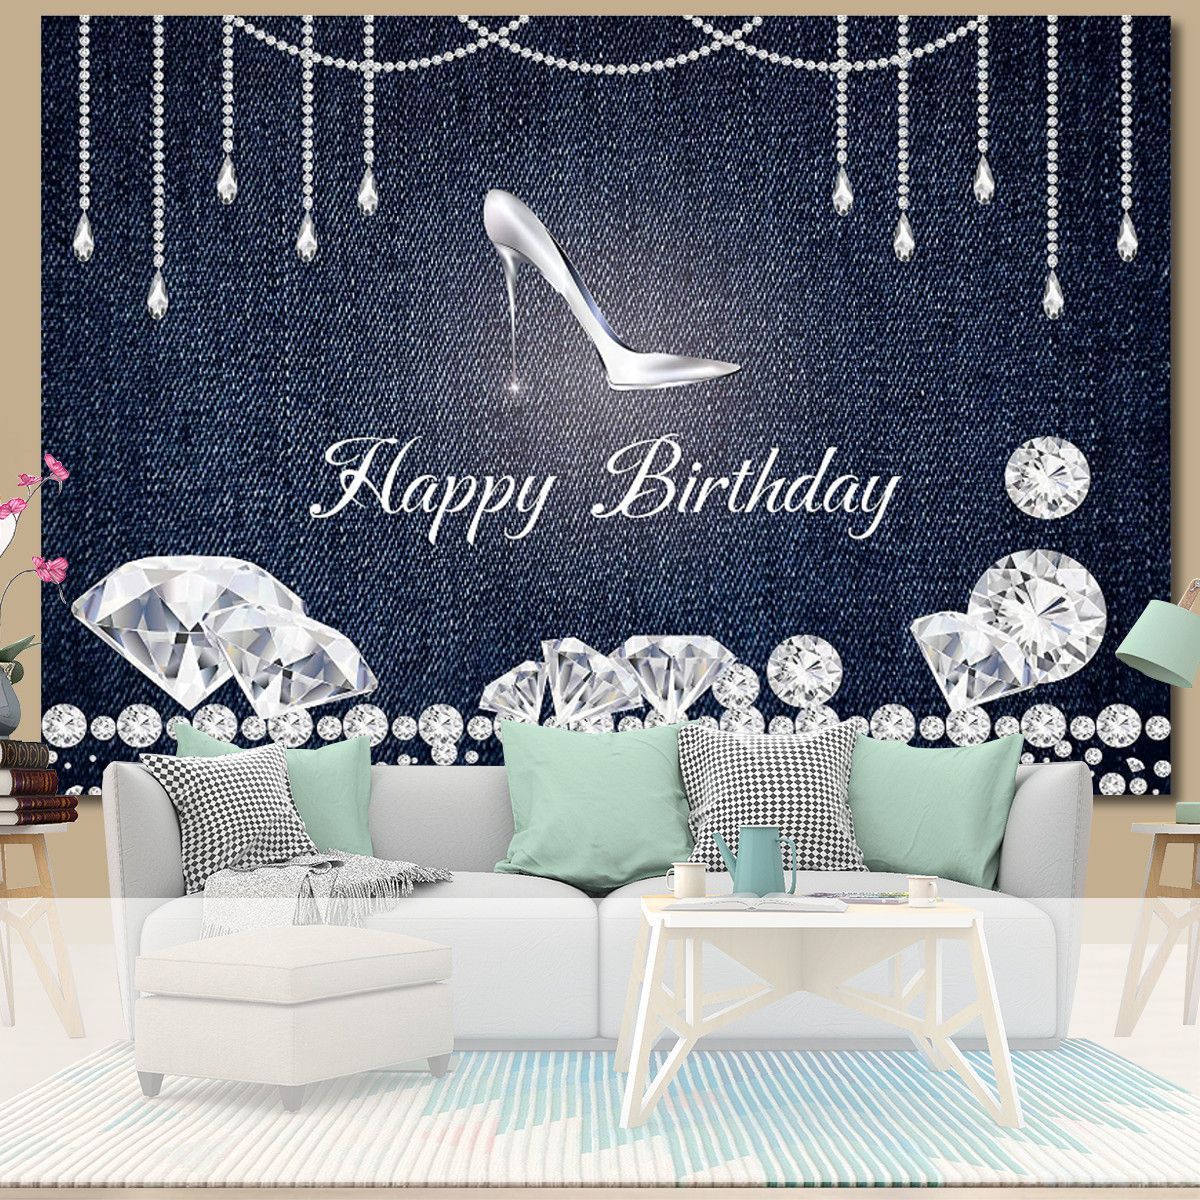 Happy-Birthday-Photography-Backdrop-Photo-Background-Studio-Home-Party-Decor-Props-1821552